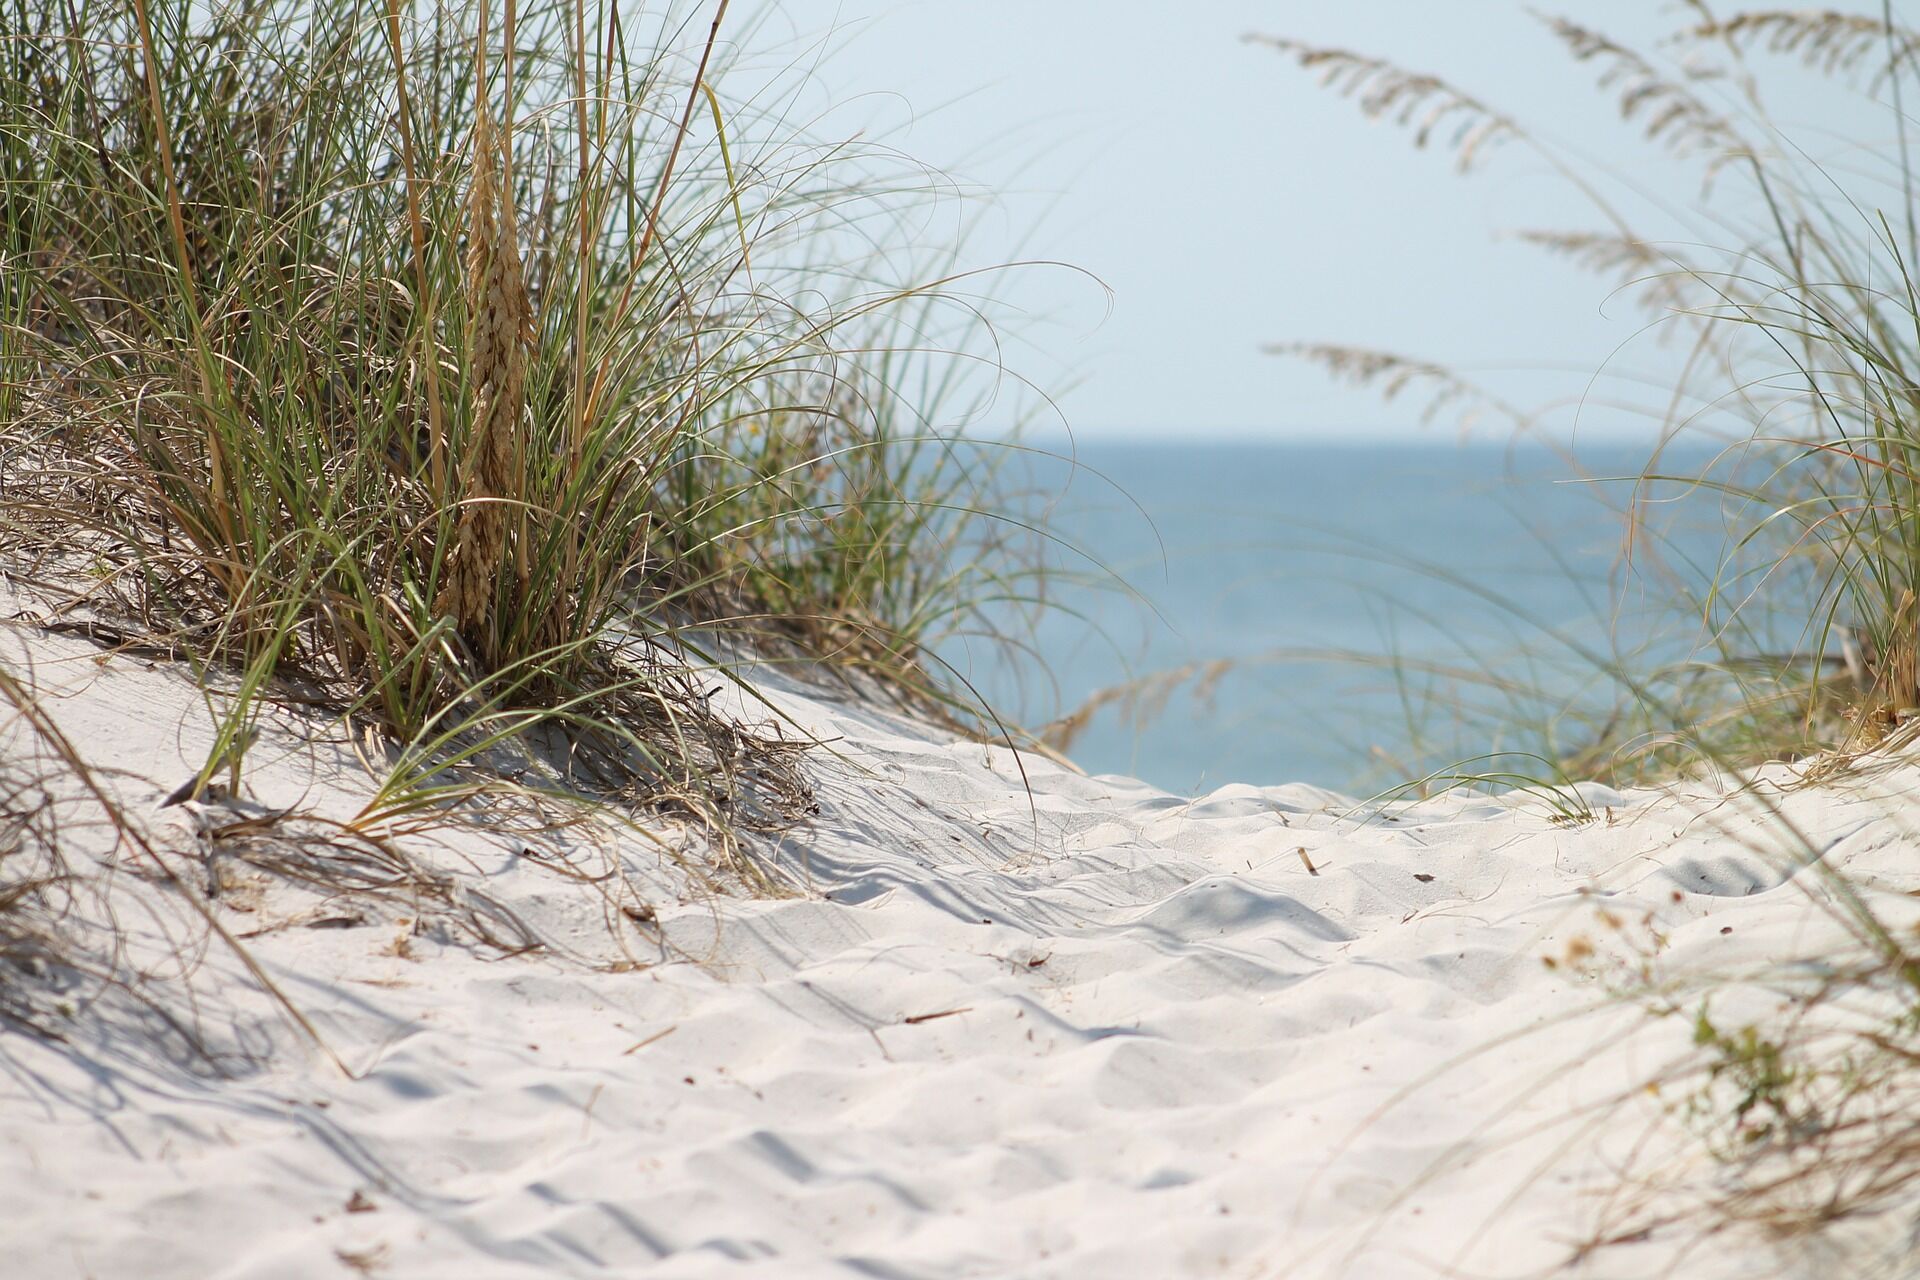 Enjoy sightseeing in Panama City Beach on your next vacation